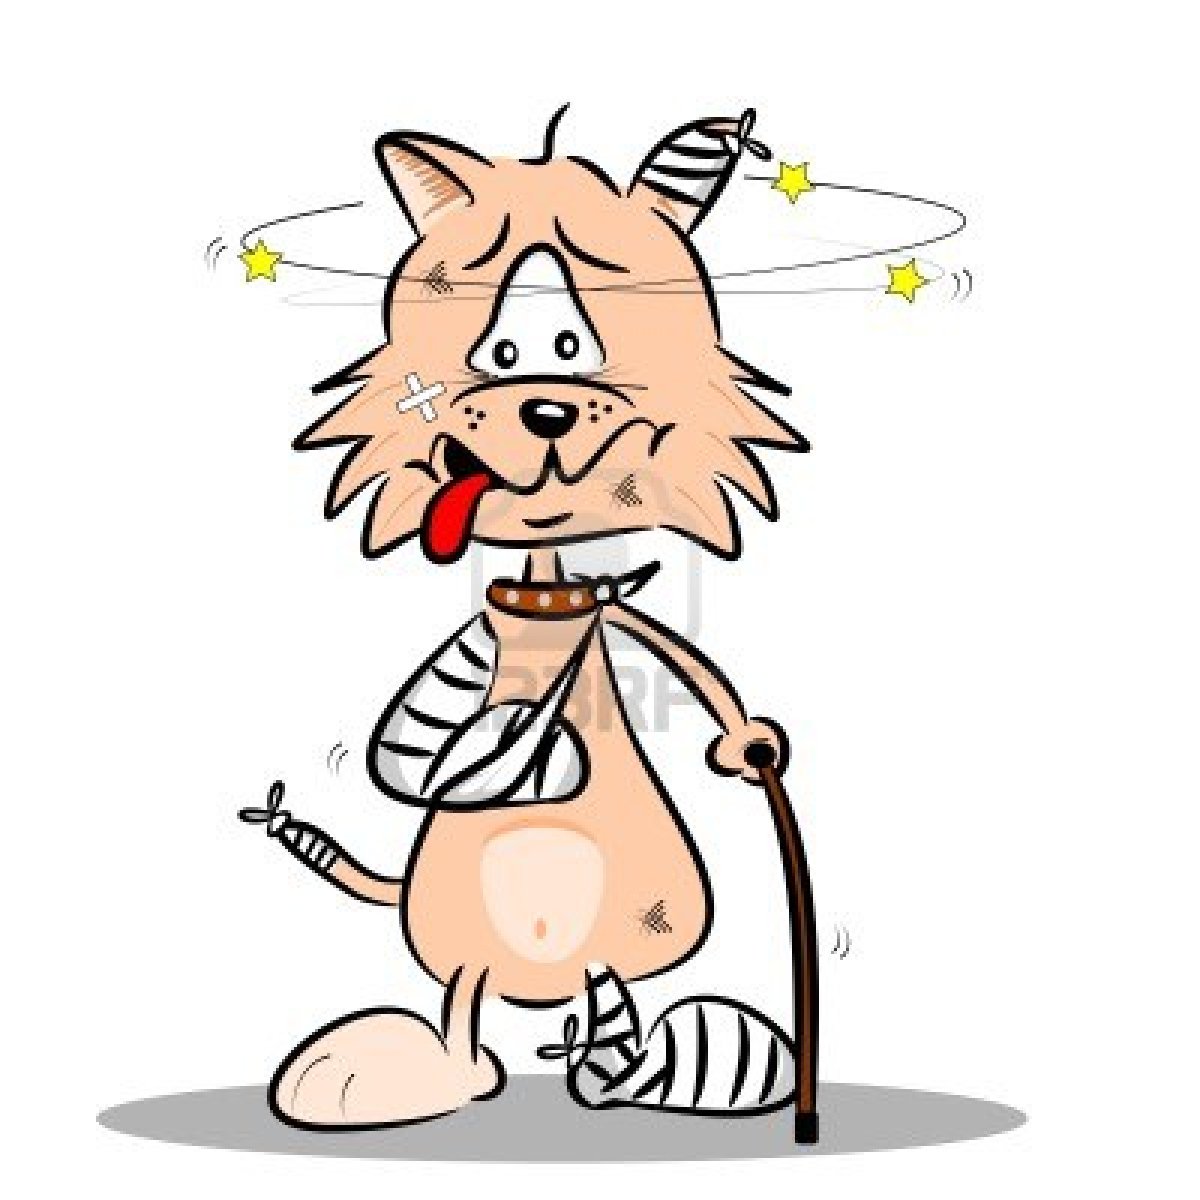 14676838 An Injured Cartoon Cat With Bandages Plaster And Walking